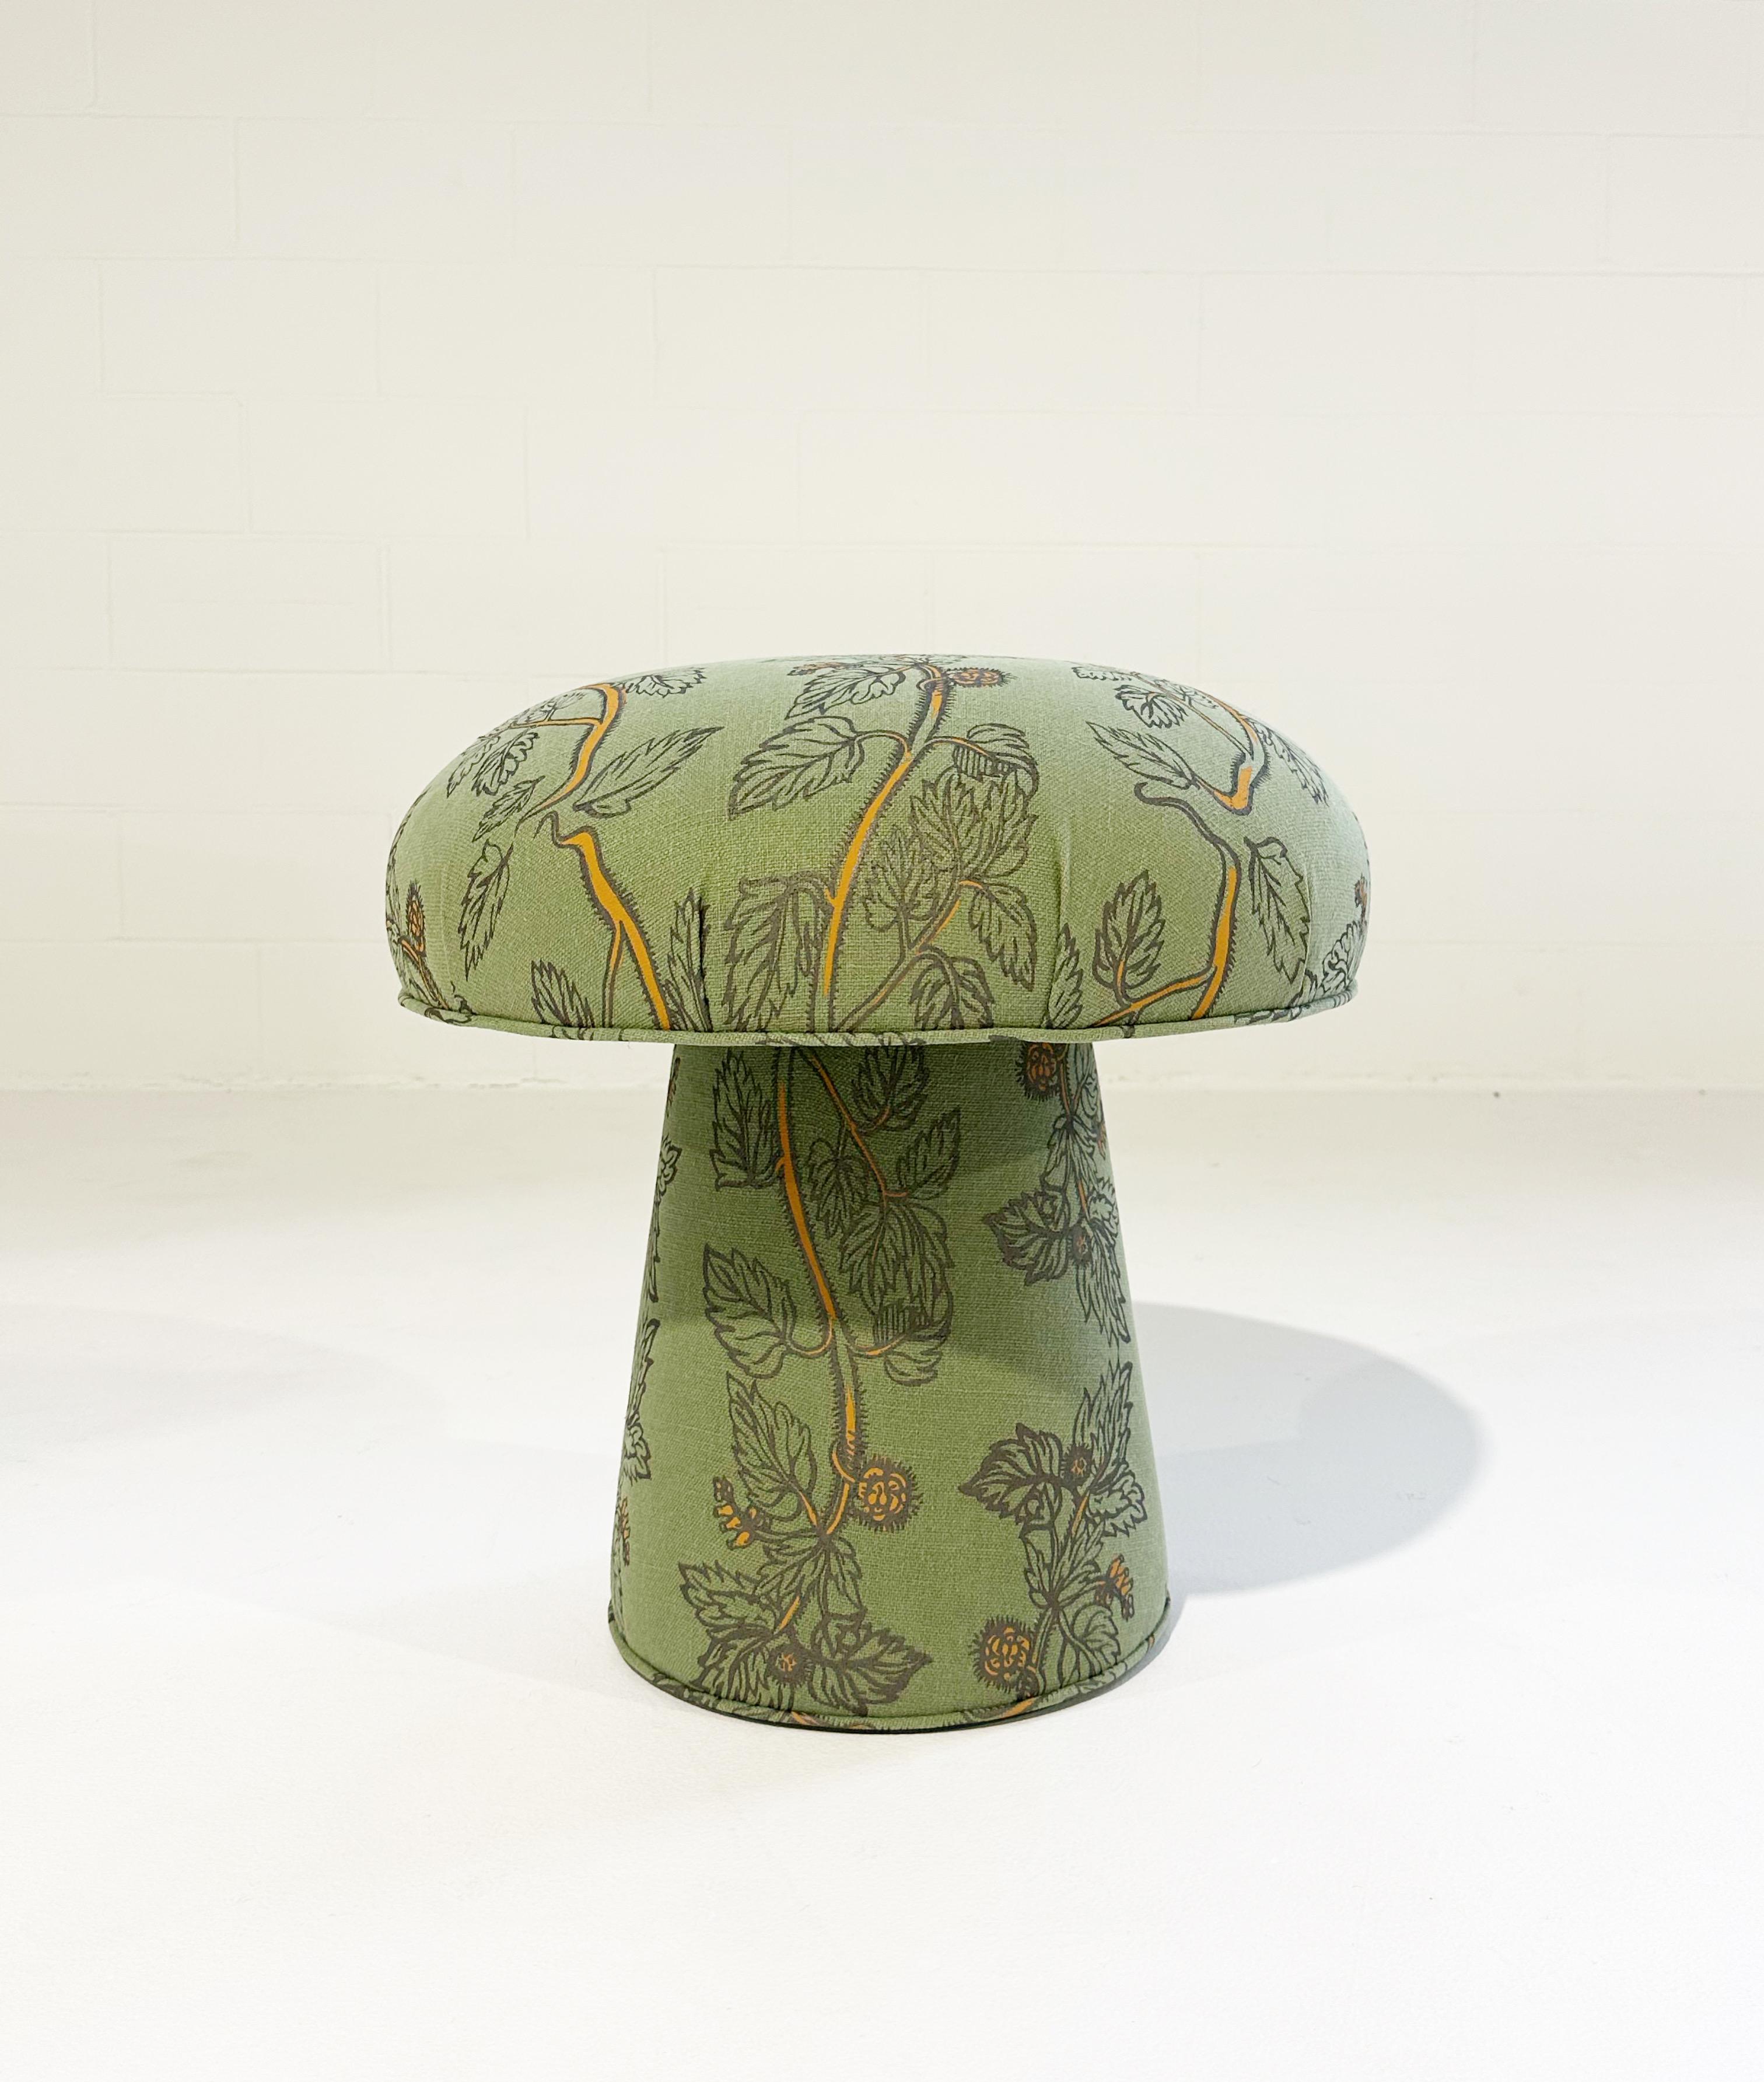 This Forsyth Mushroom Pouf Ottoman was created and designed by the Forsyth design team. Each ottoman is handcrafted in Saint Louis. A cute decorative piece for any room adding natural texture and a bit of whimsy. The perfect ottoman or extra seat.